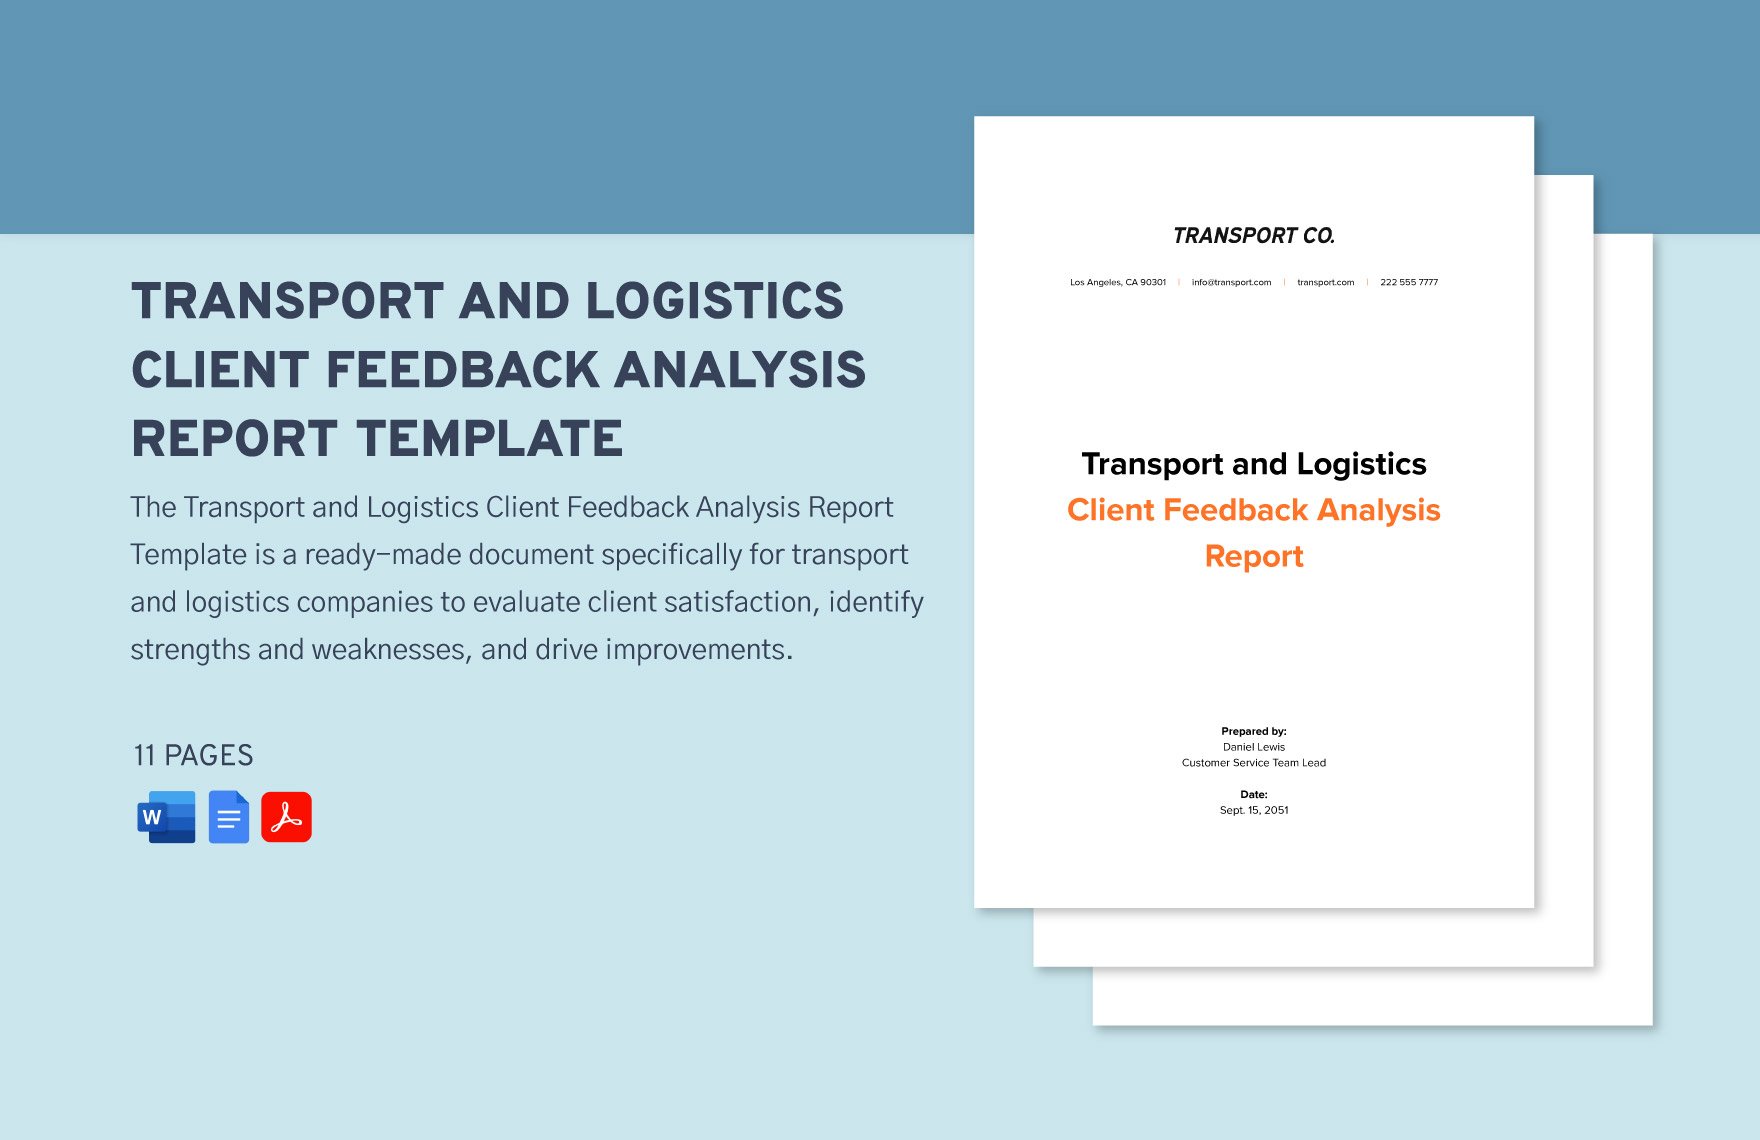 Transport and Logistics Client Feedback Analysis Report Template